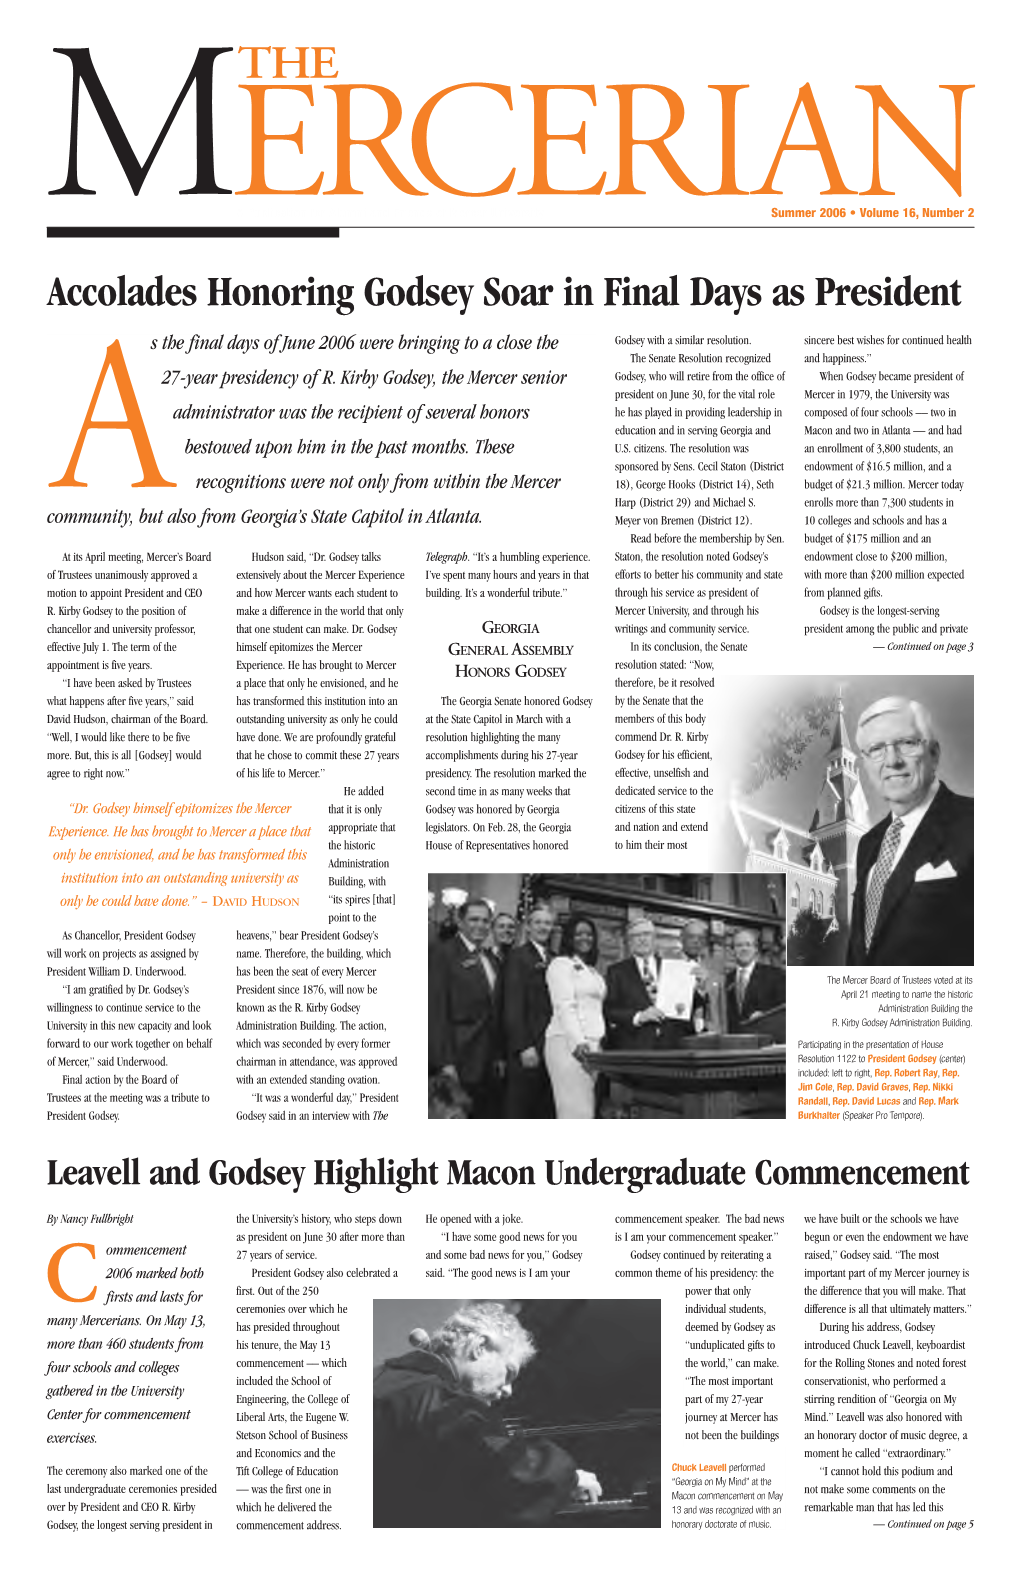 Accolades Honoring Godsey Soar in Final Days As President S the Final Days of June 2006 Were Bringing to a Close the Godsey with a Similar Resolution